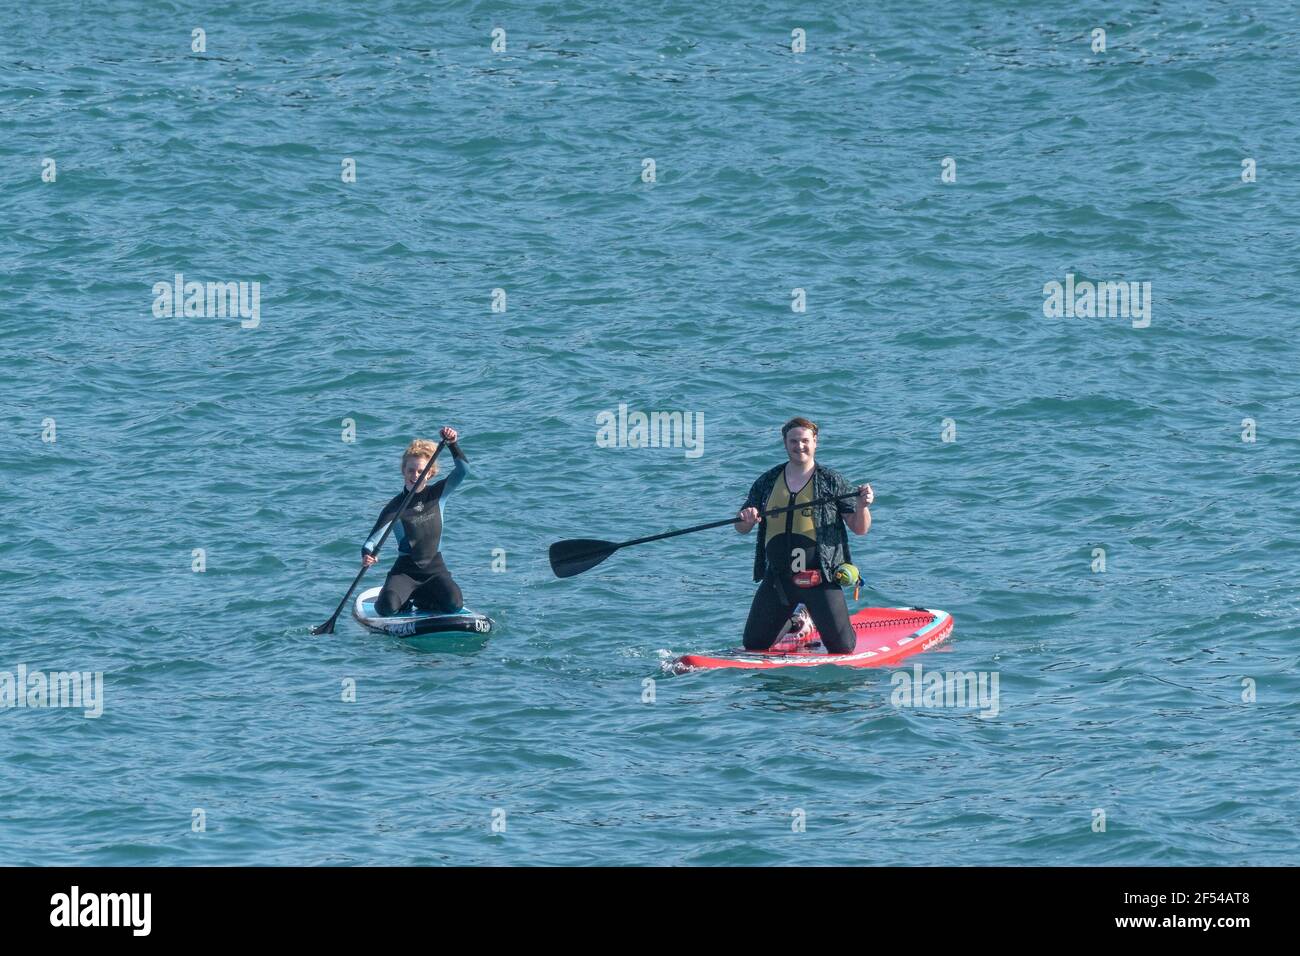 Two holidaymakers kneeling on Stand Up Paddleboards in Newquay Bay in Cornwall. Stock Photo